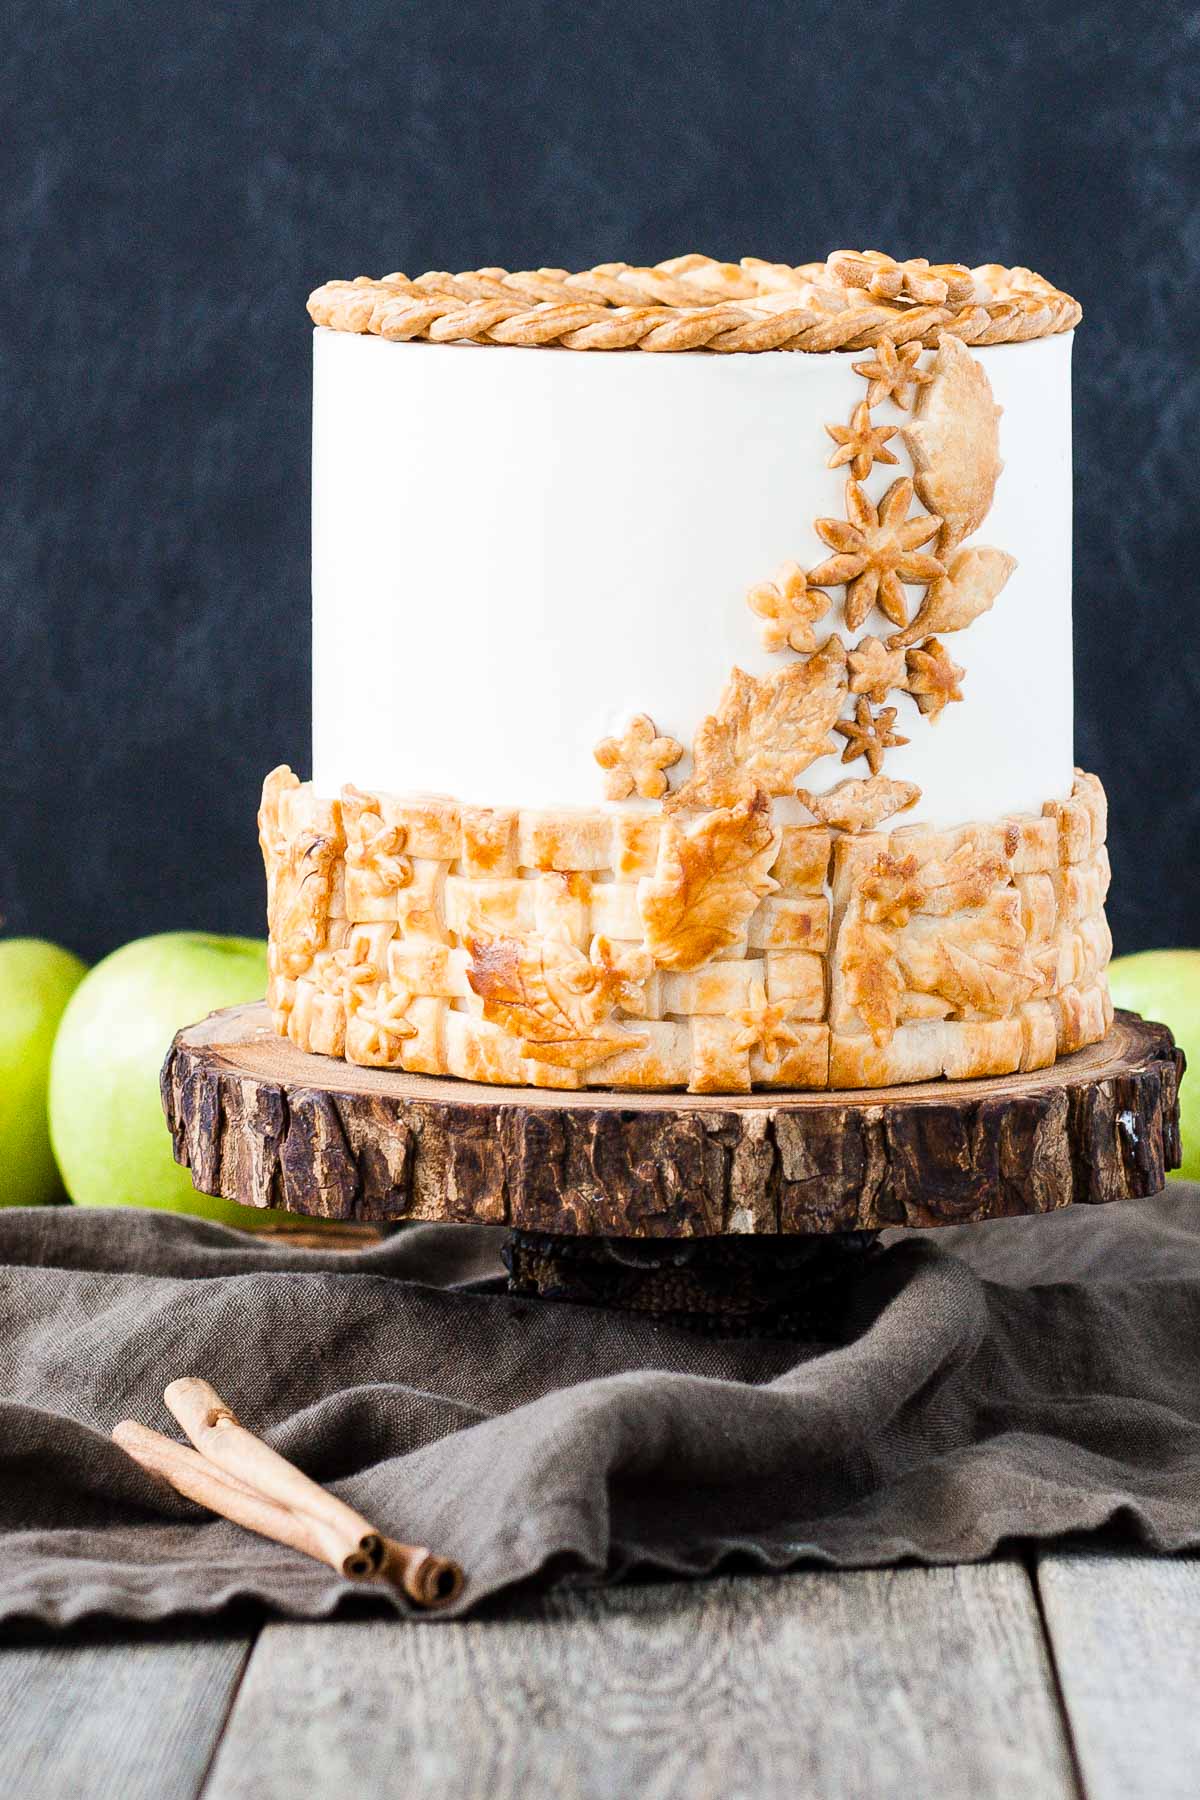 A cake sitting on top of a rustic wooden cake stand with apples in the background.